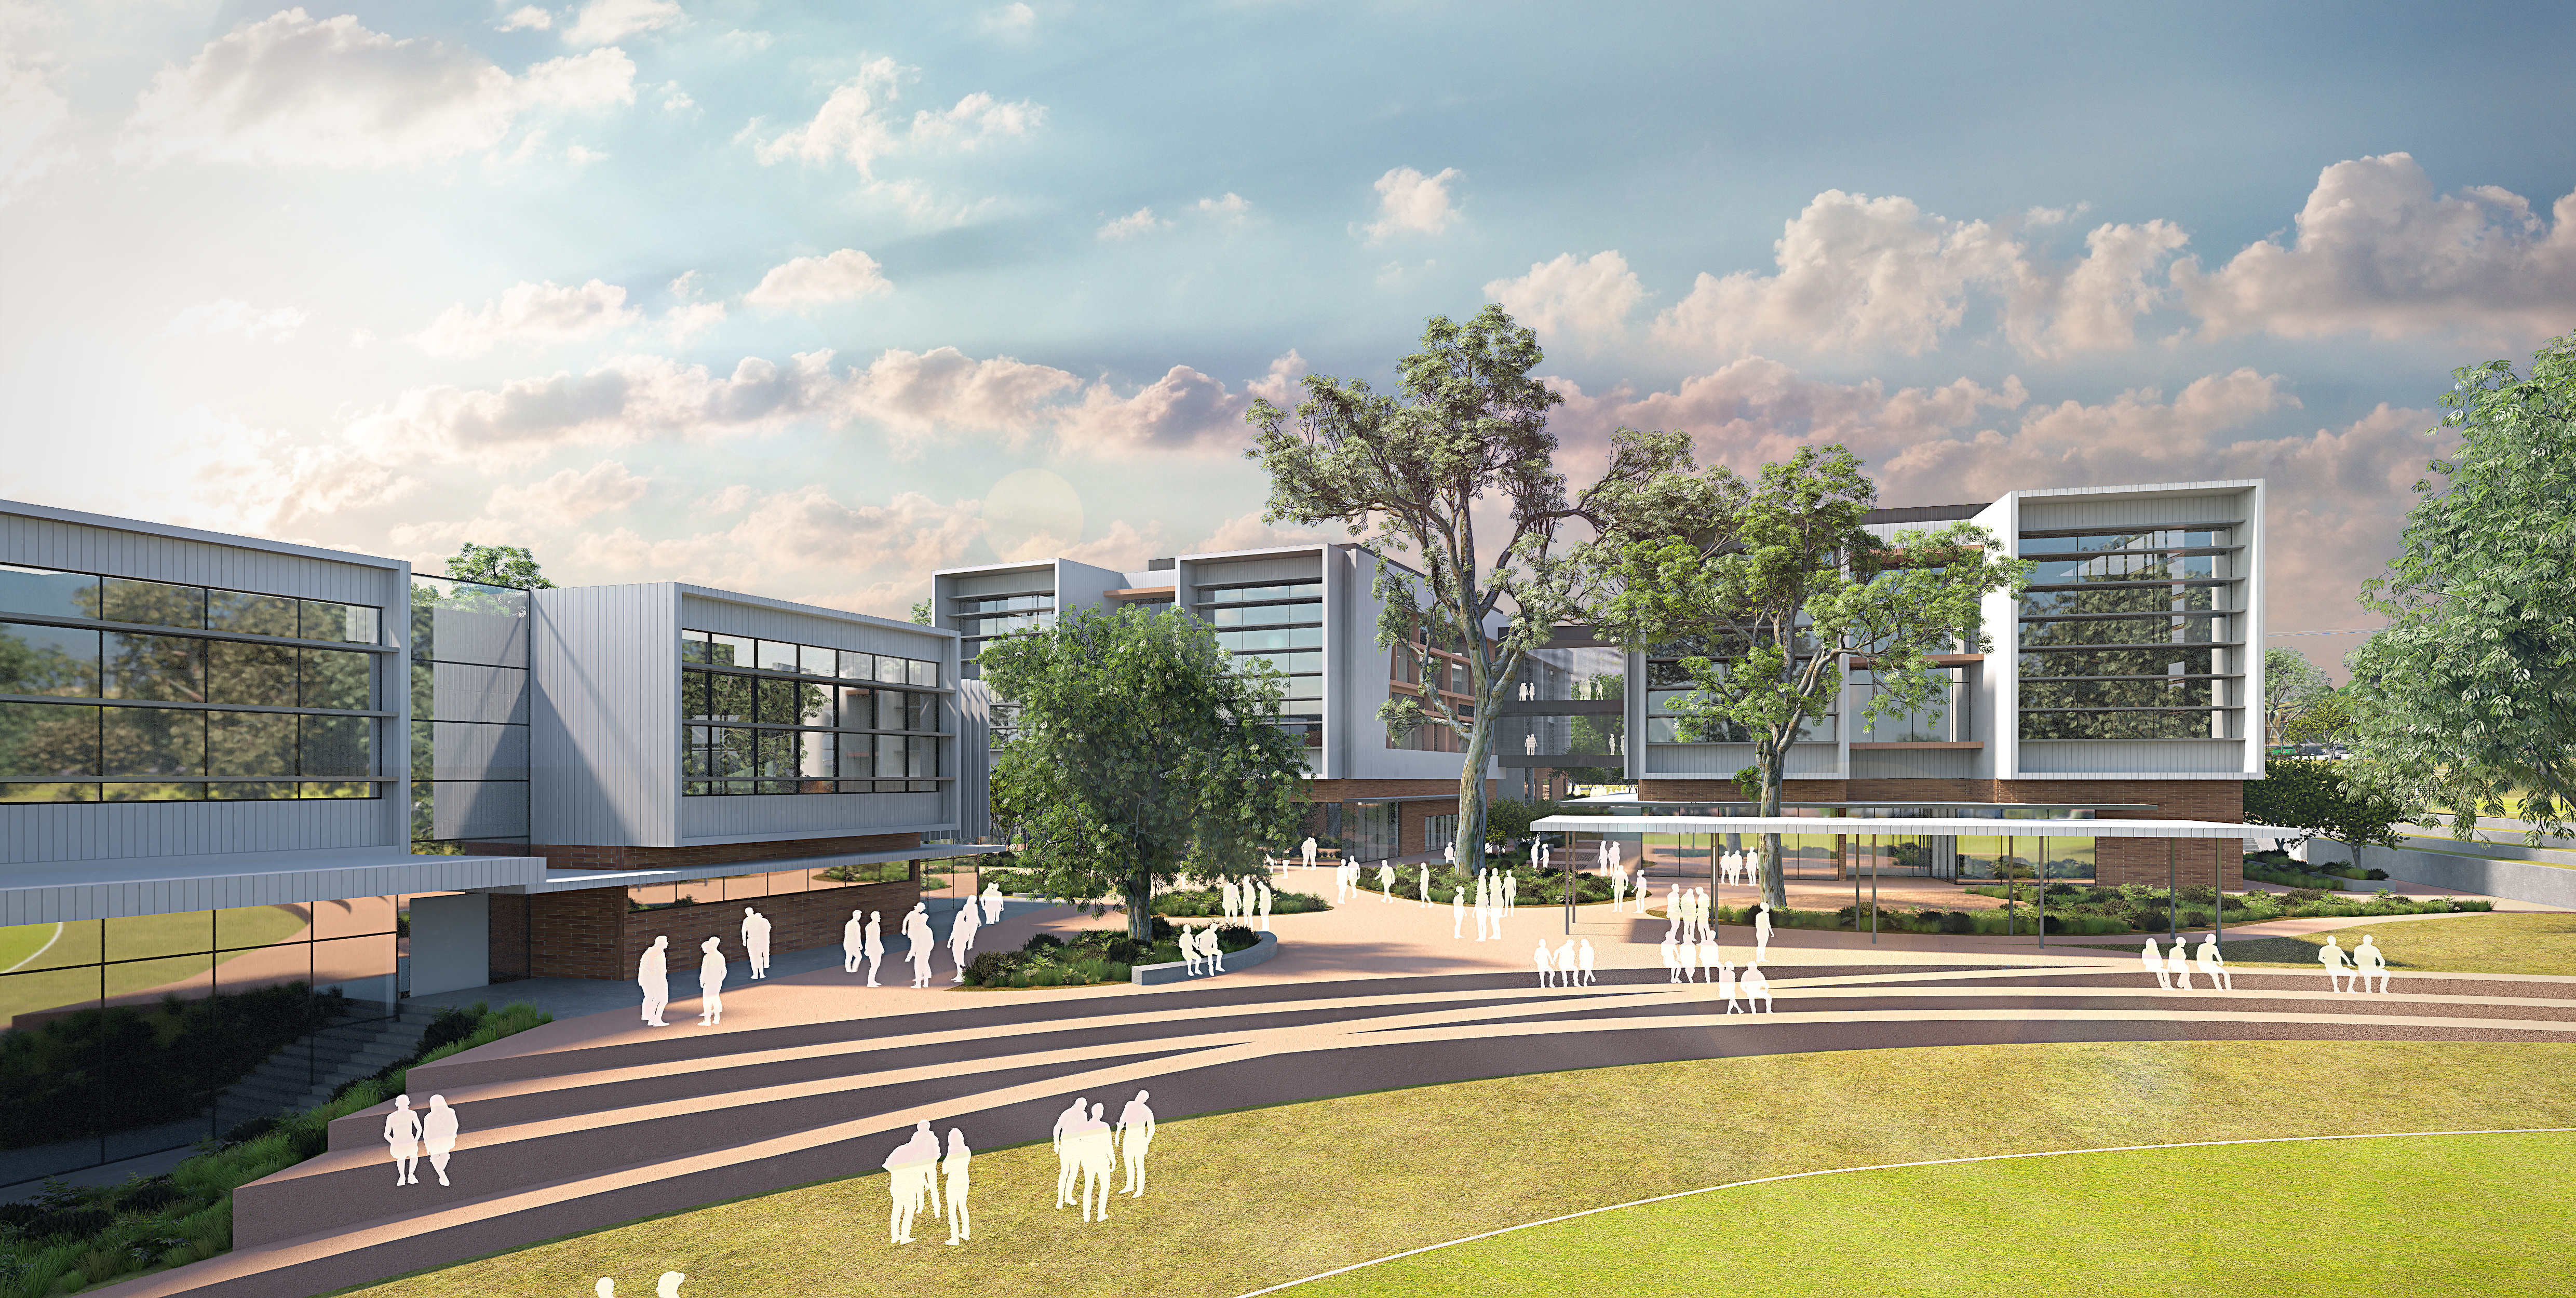 An artist impression of the new Morialta Secondary College